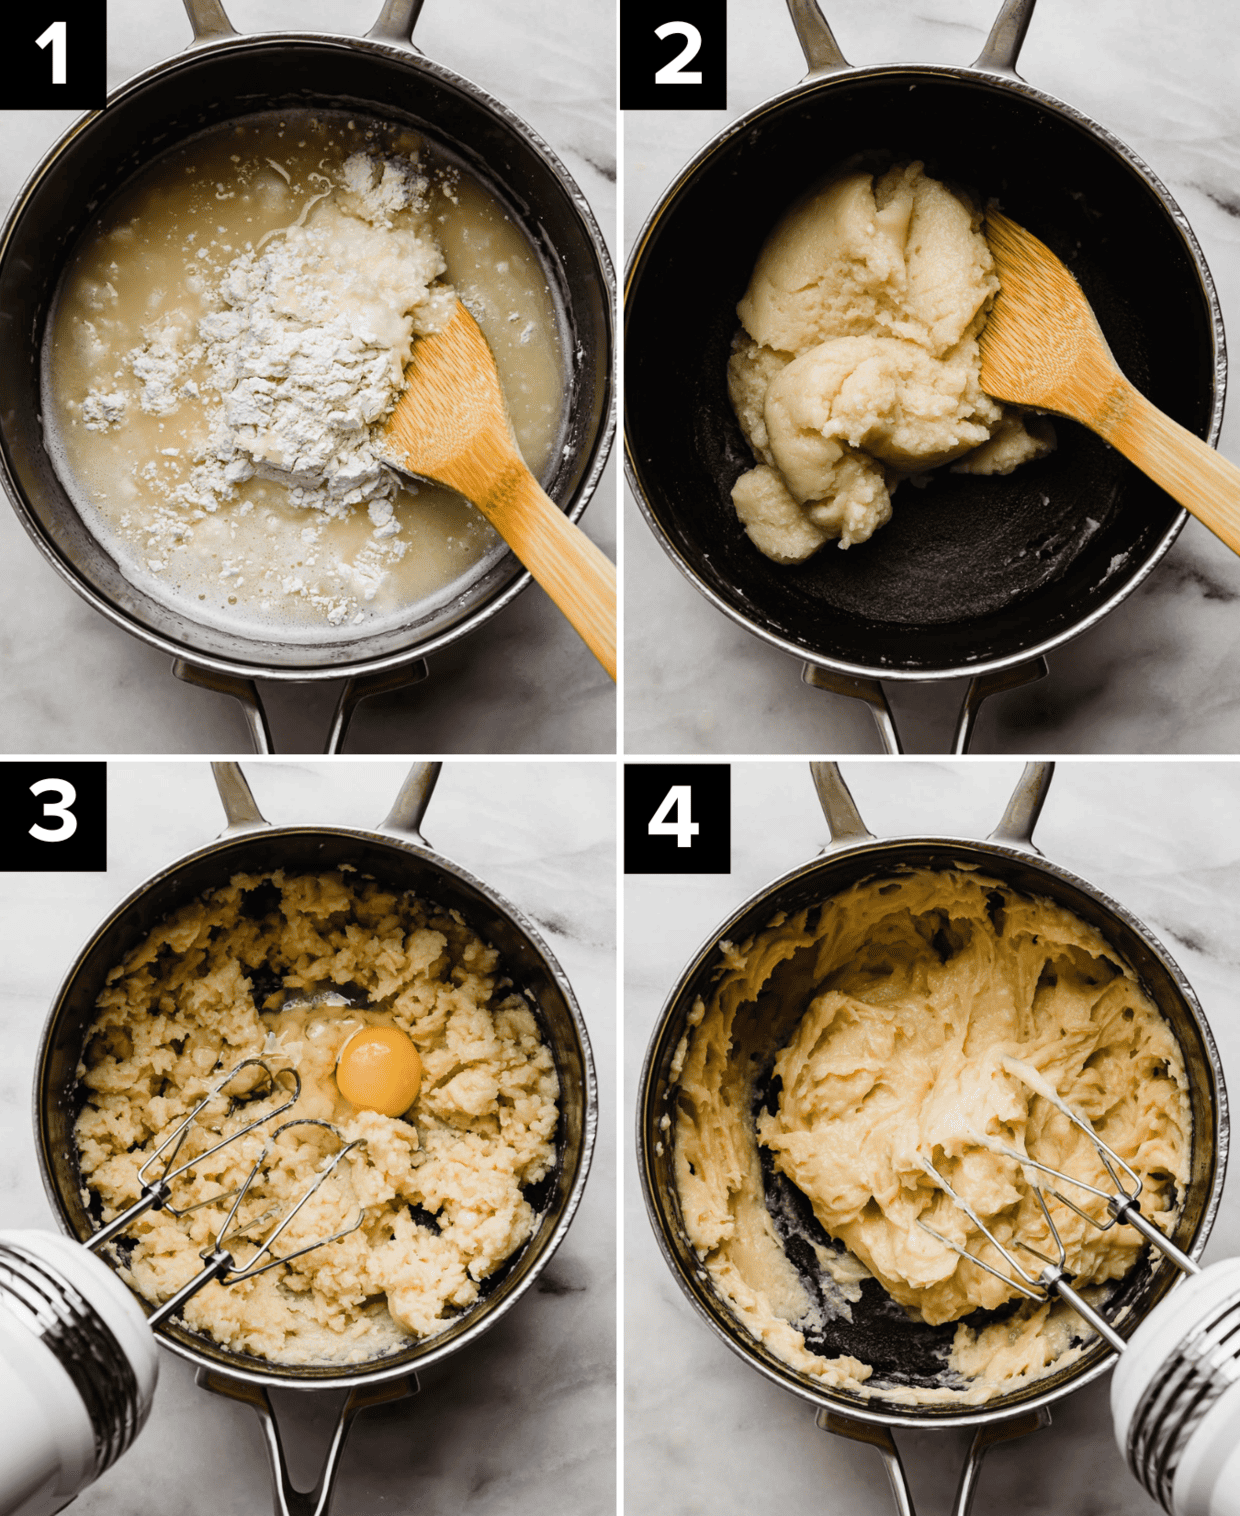 A black saucepan with butter, flour and water mixed, then cooked and the mixture forming into a ball. Bottom left image is an egg added to the mixture and being mixed in.